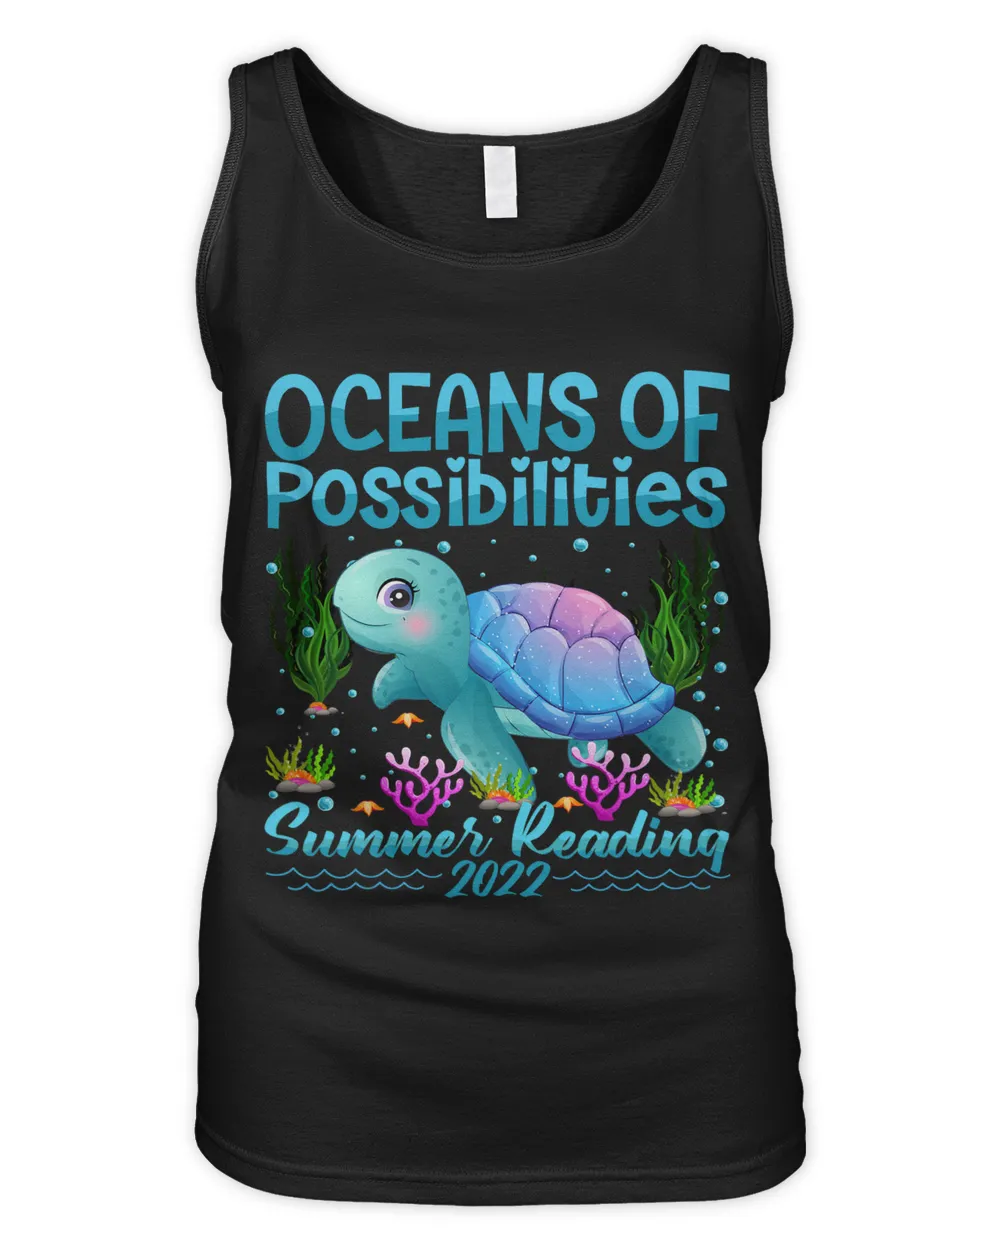 Cute Oceans of Possibilities Summer Reading Turtle